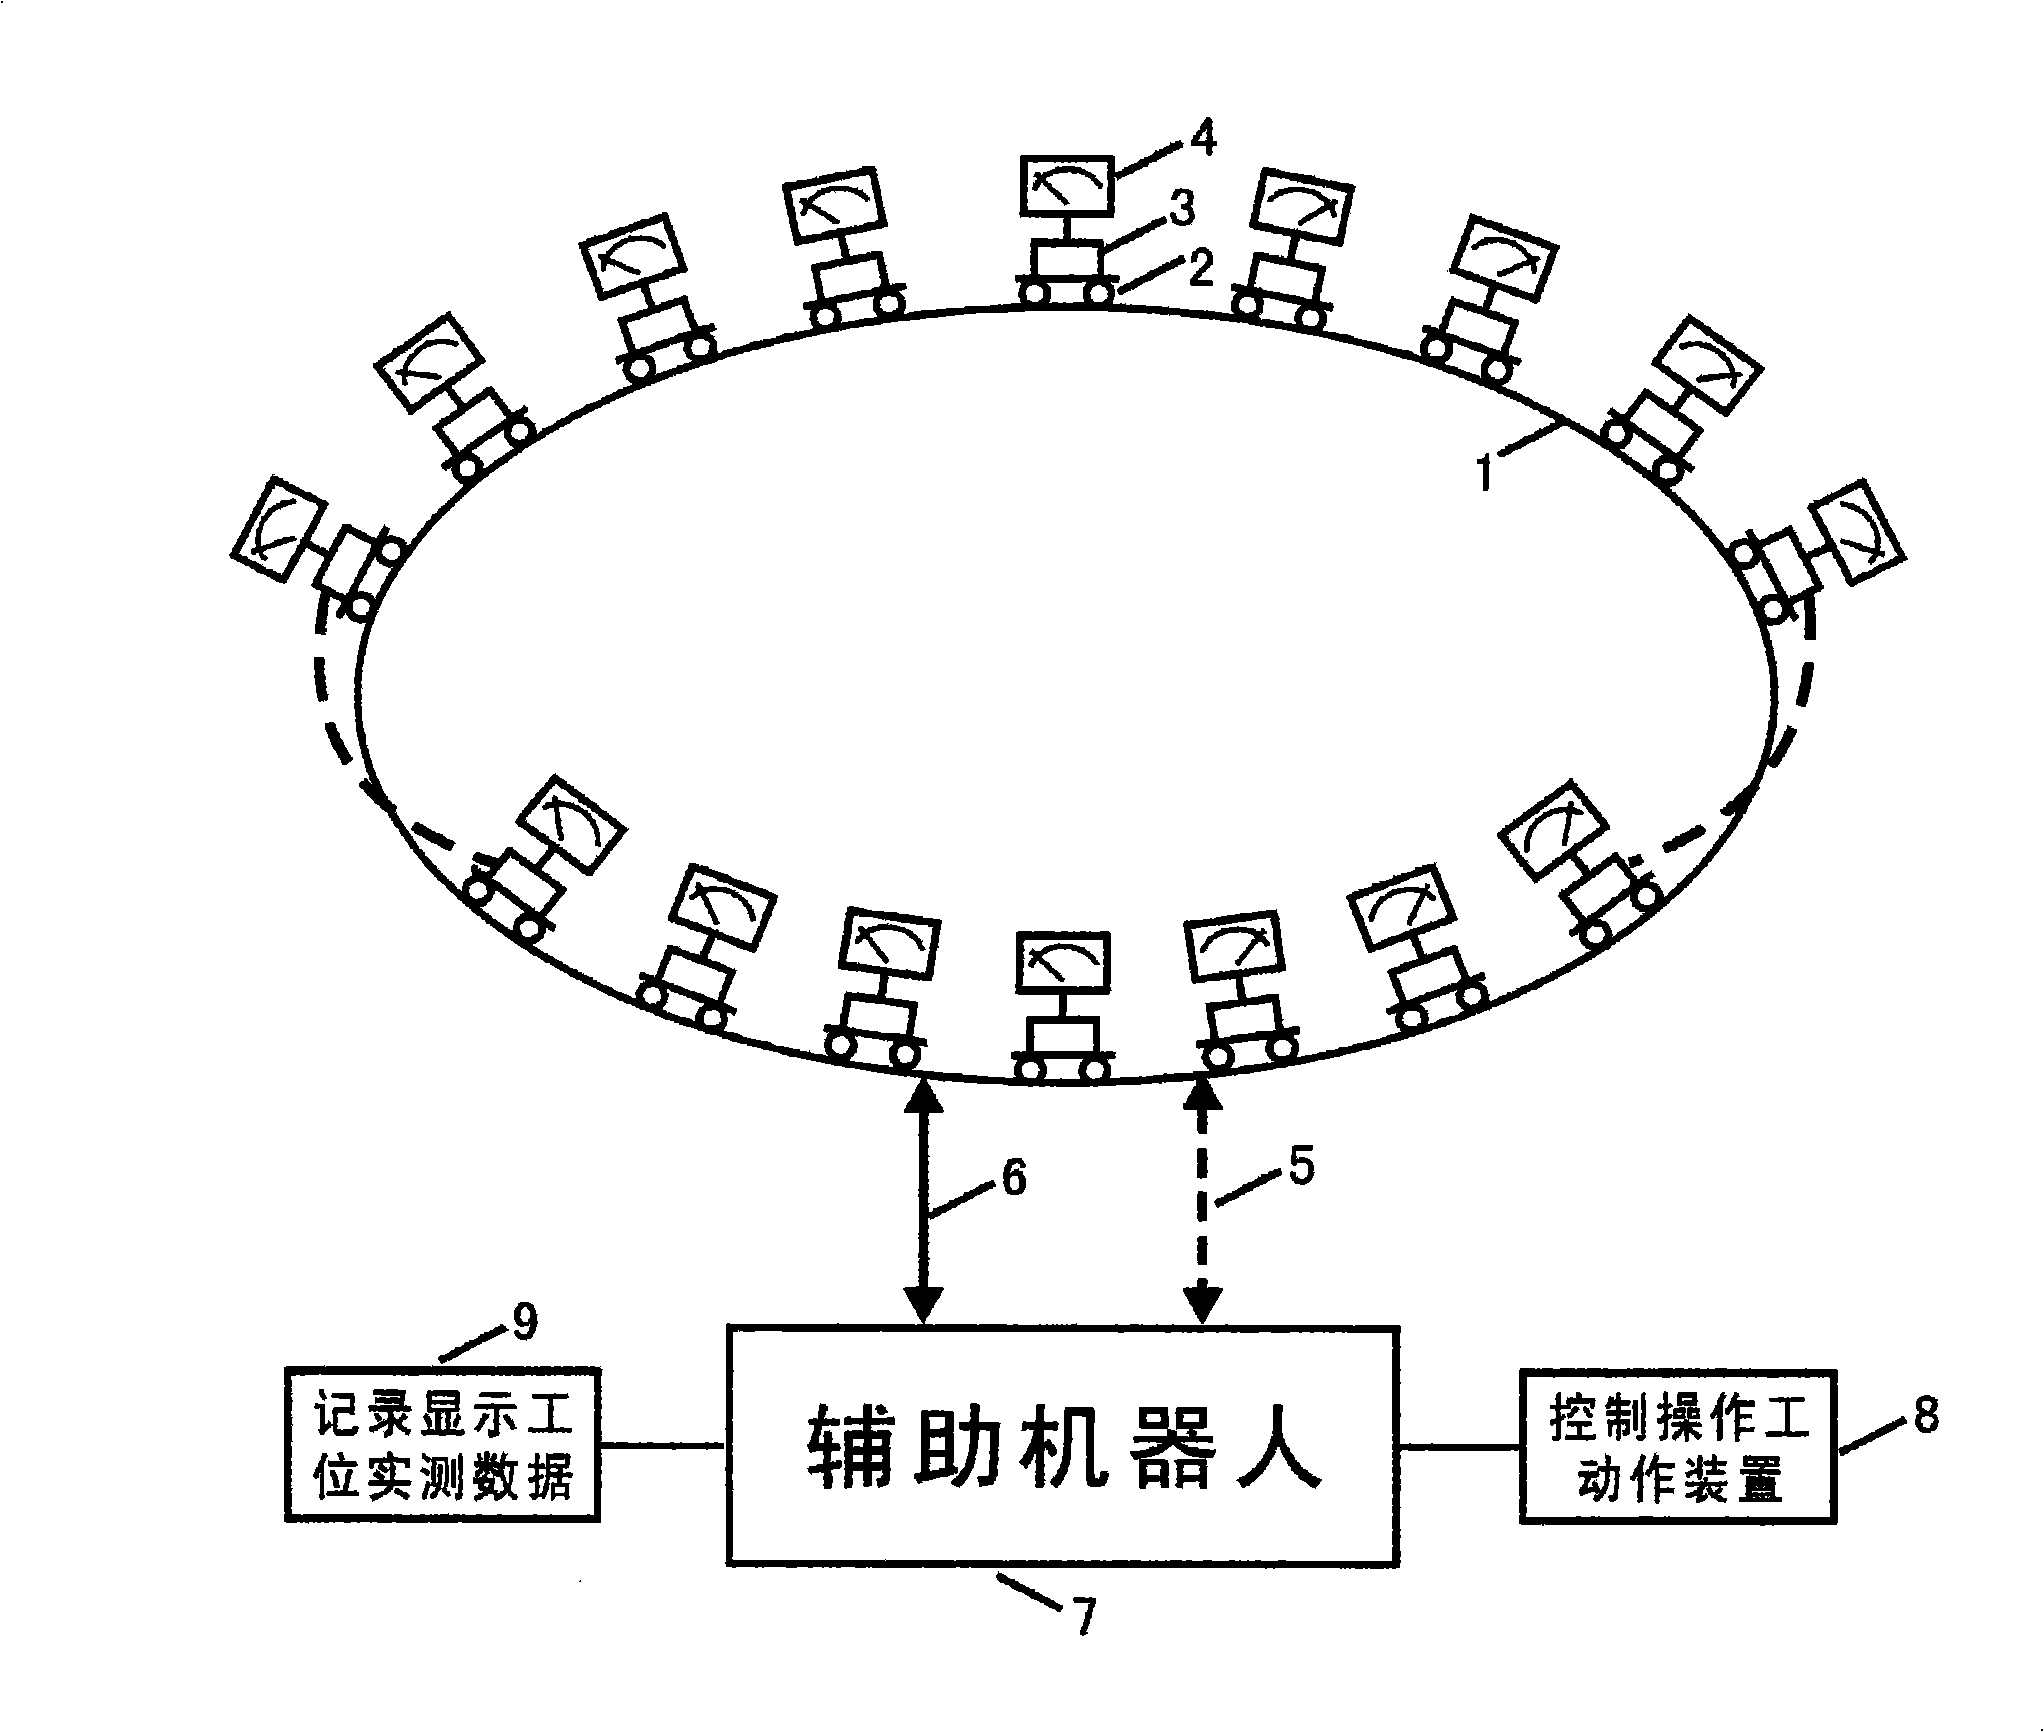 Auxiliary robot for wireless detecting and controlling assembly line product manufacture